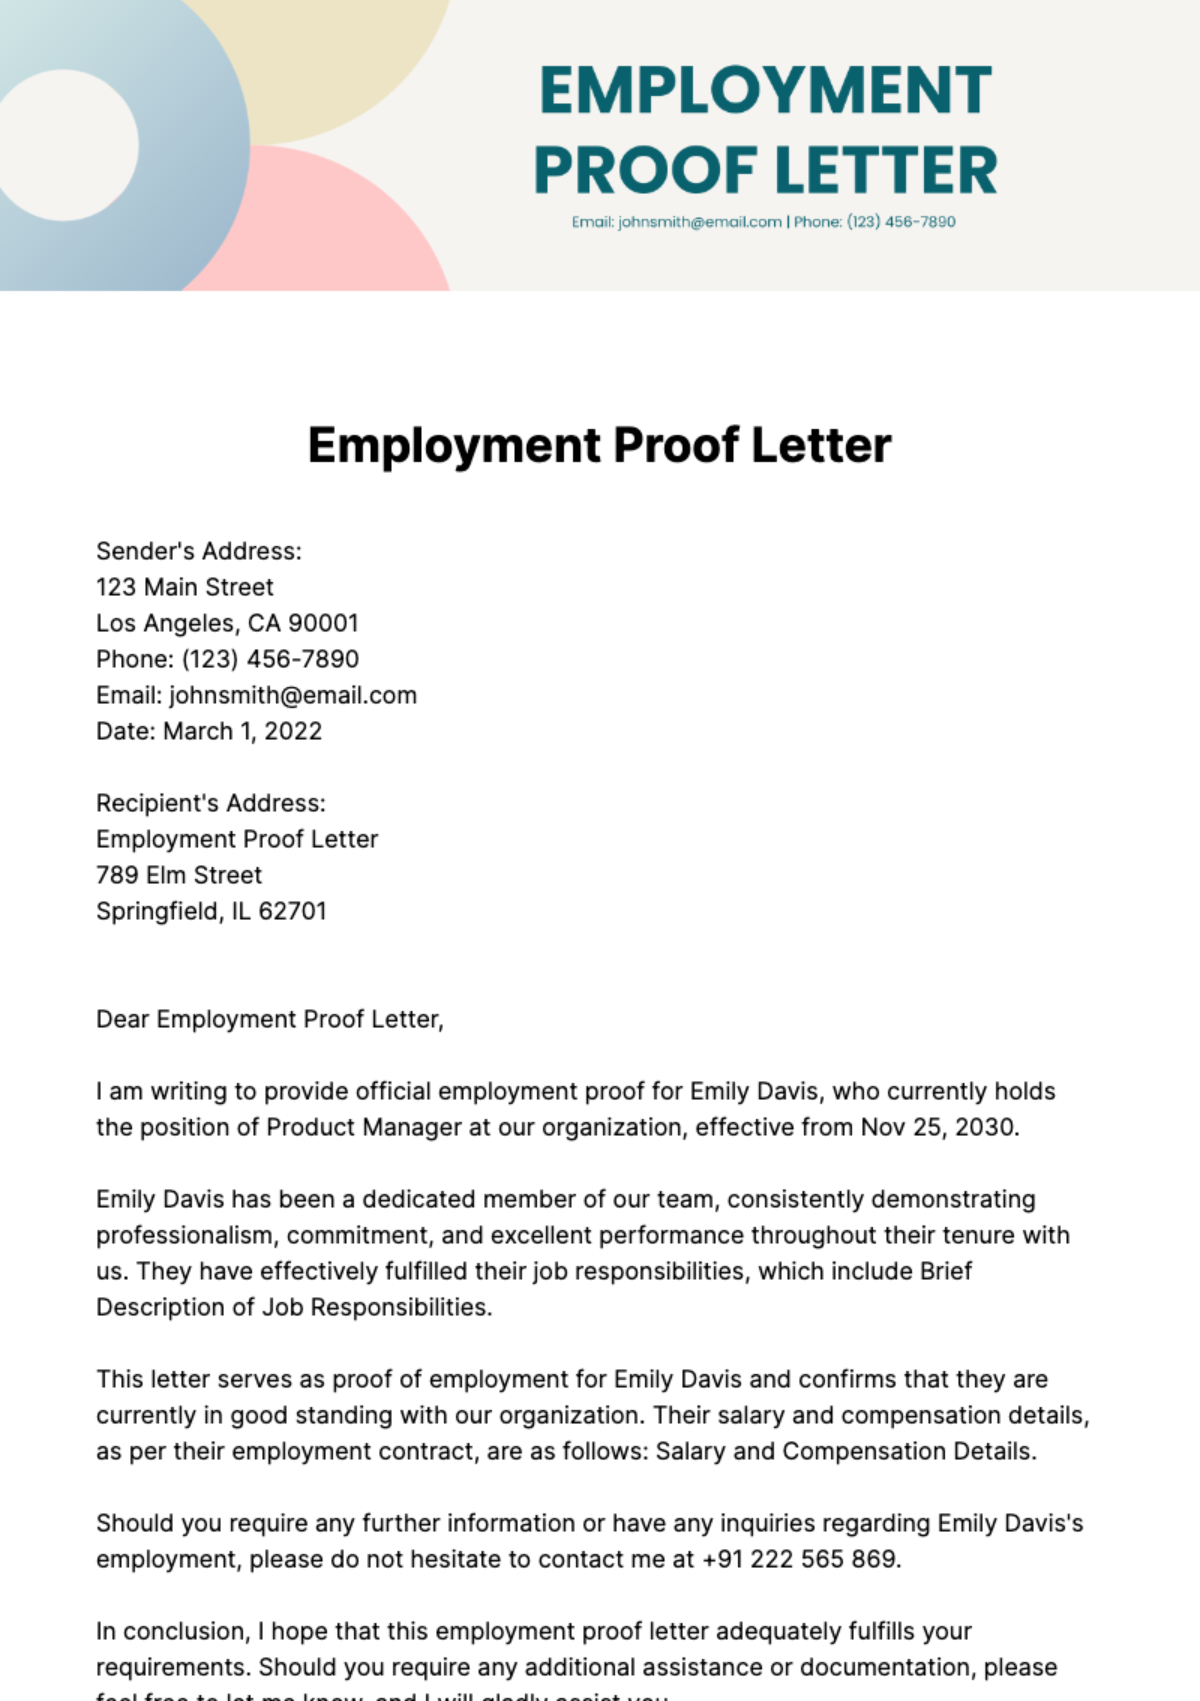 Free Employment Proof Letter Template